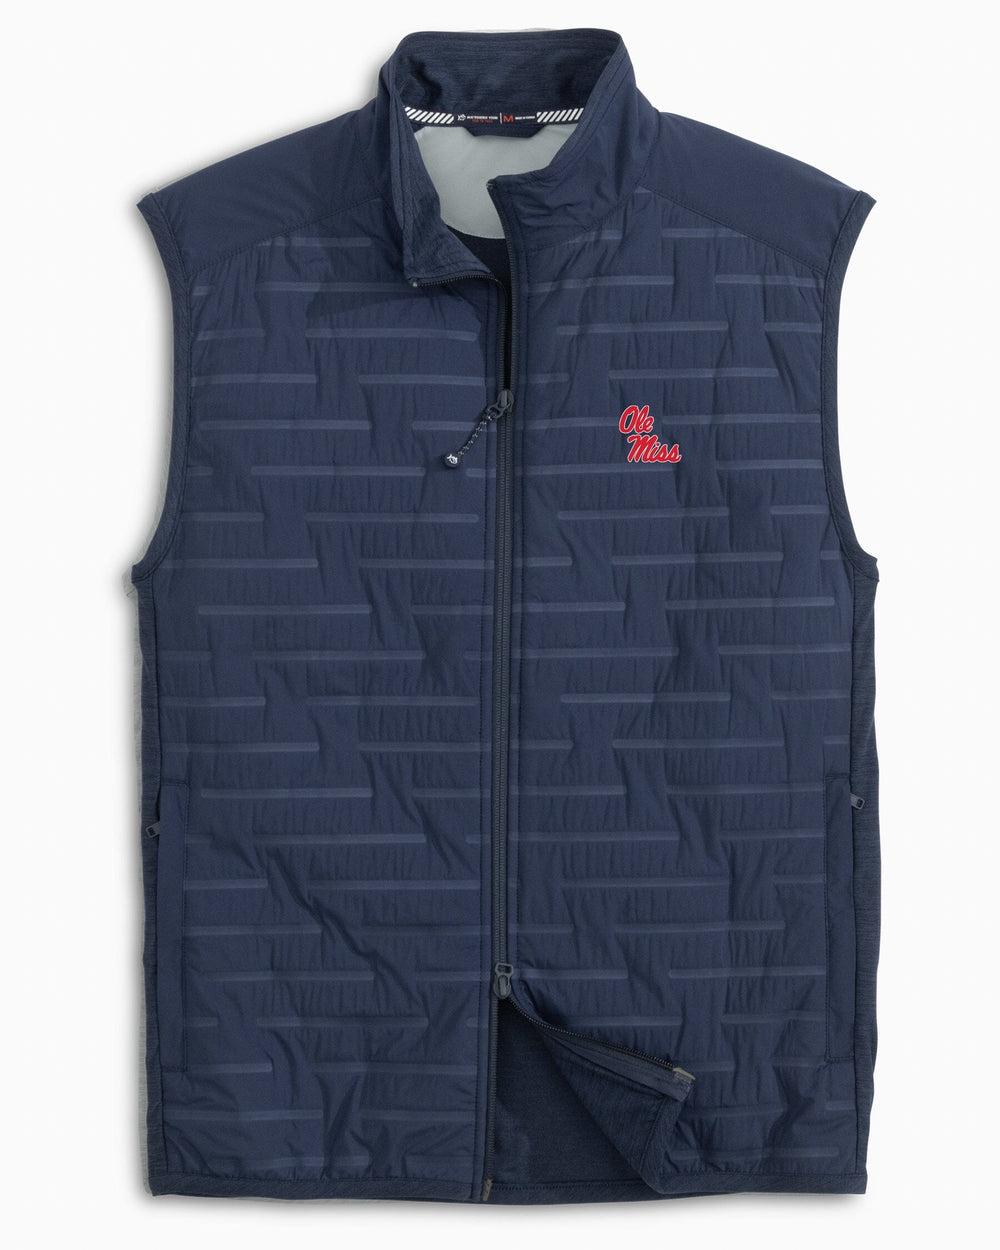 The front view of the Ole Miss Rebels Abercorn Performance Vest by Southern Tide - True Navy